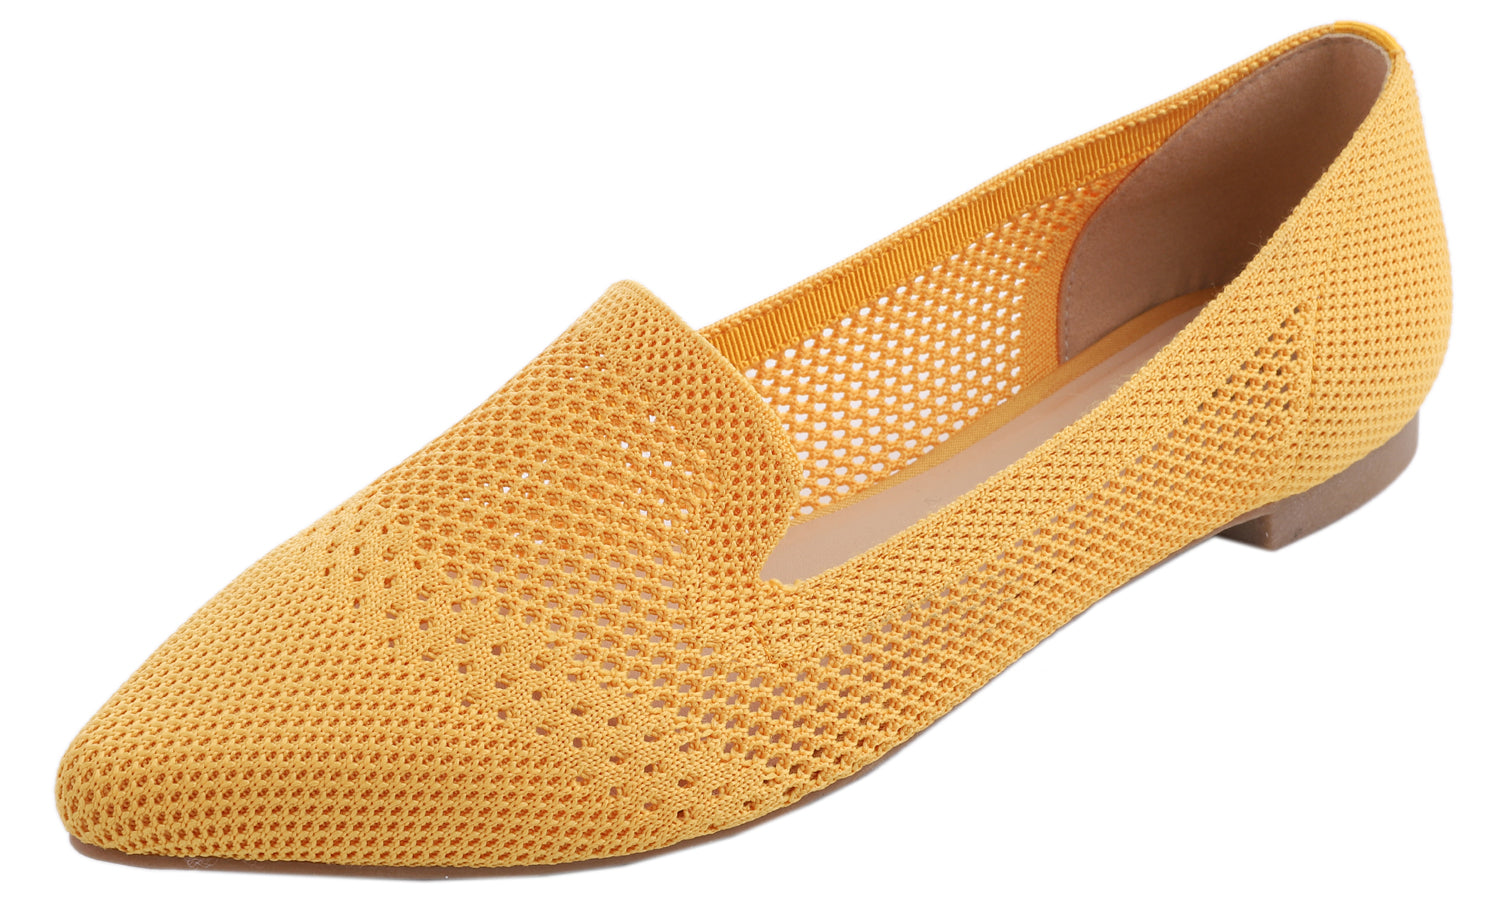 Feversole Women's Woven Fashion Breathable Knit Flat Shoes Pointed Loafer Yellow